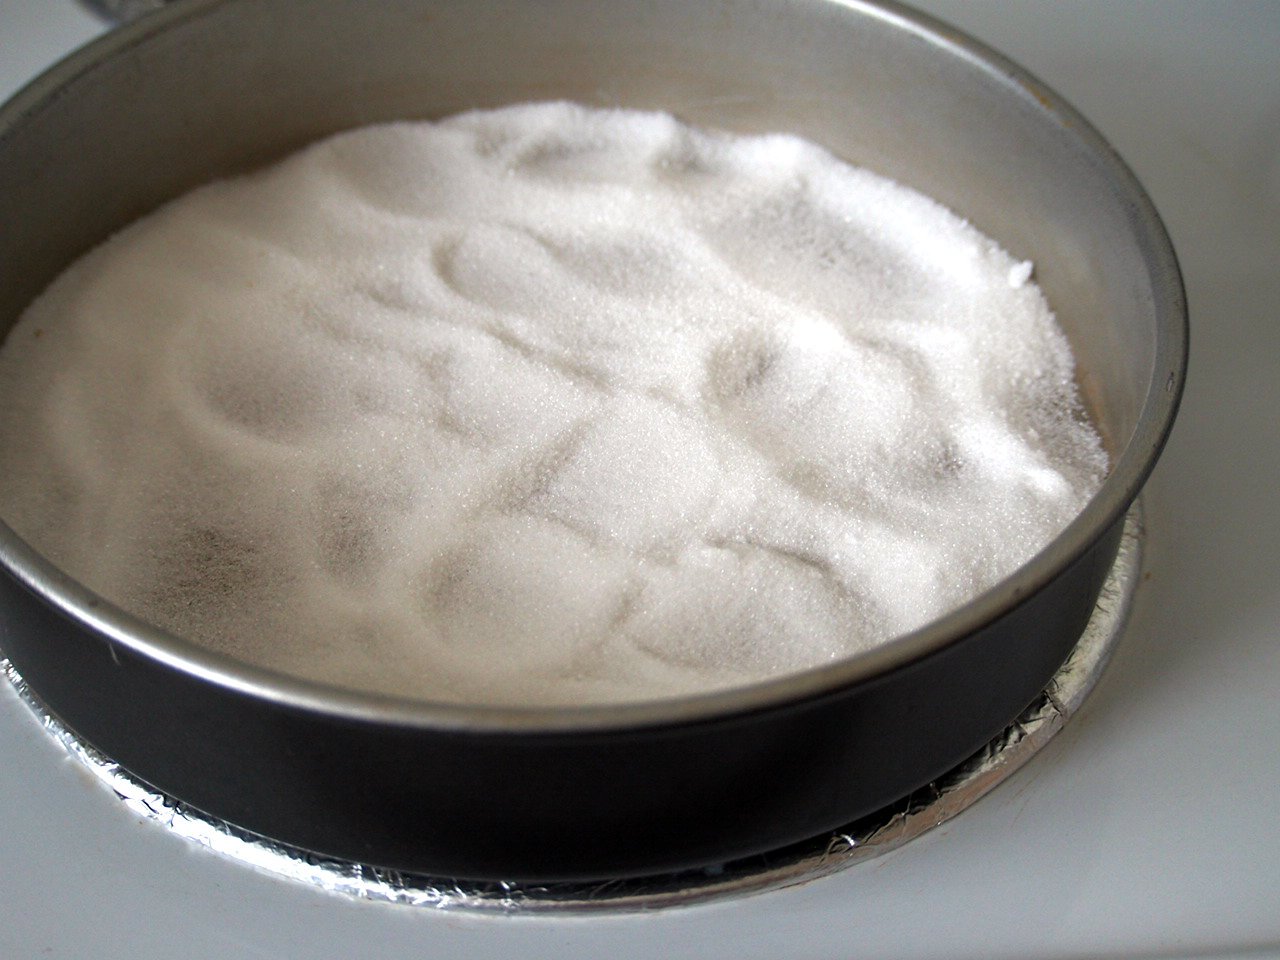 Sugar cooked on a pan until it caramelizes.